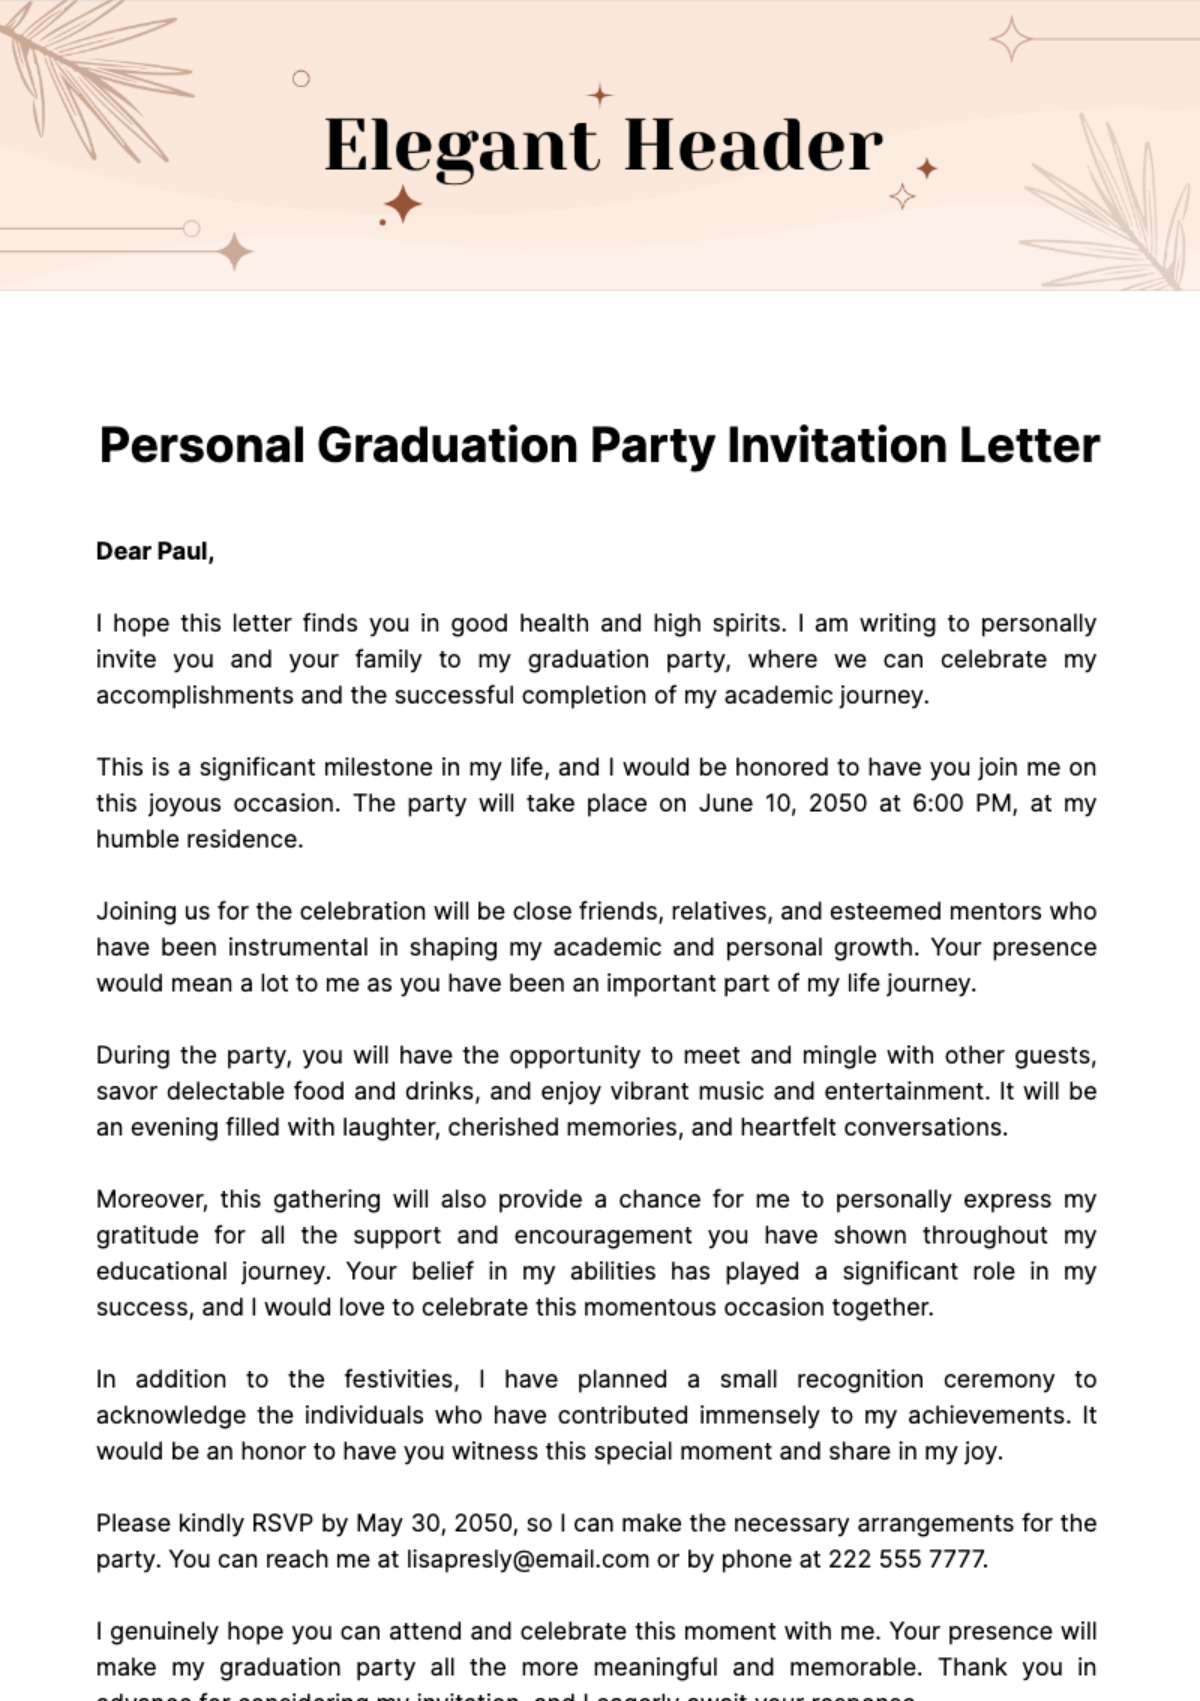 Personal Graduation Party Invitation Letter Template